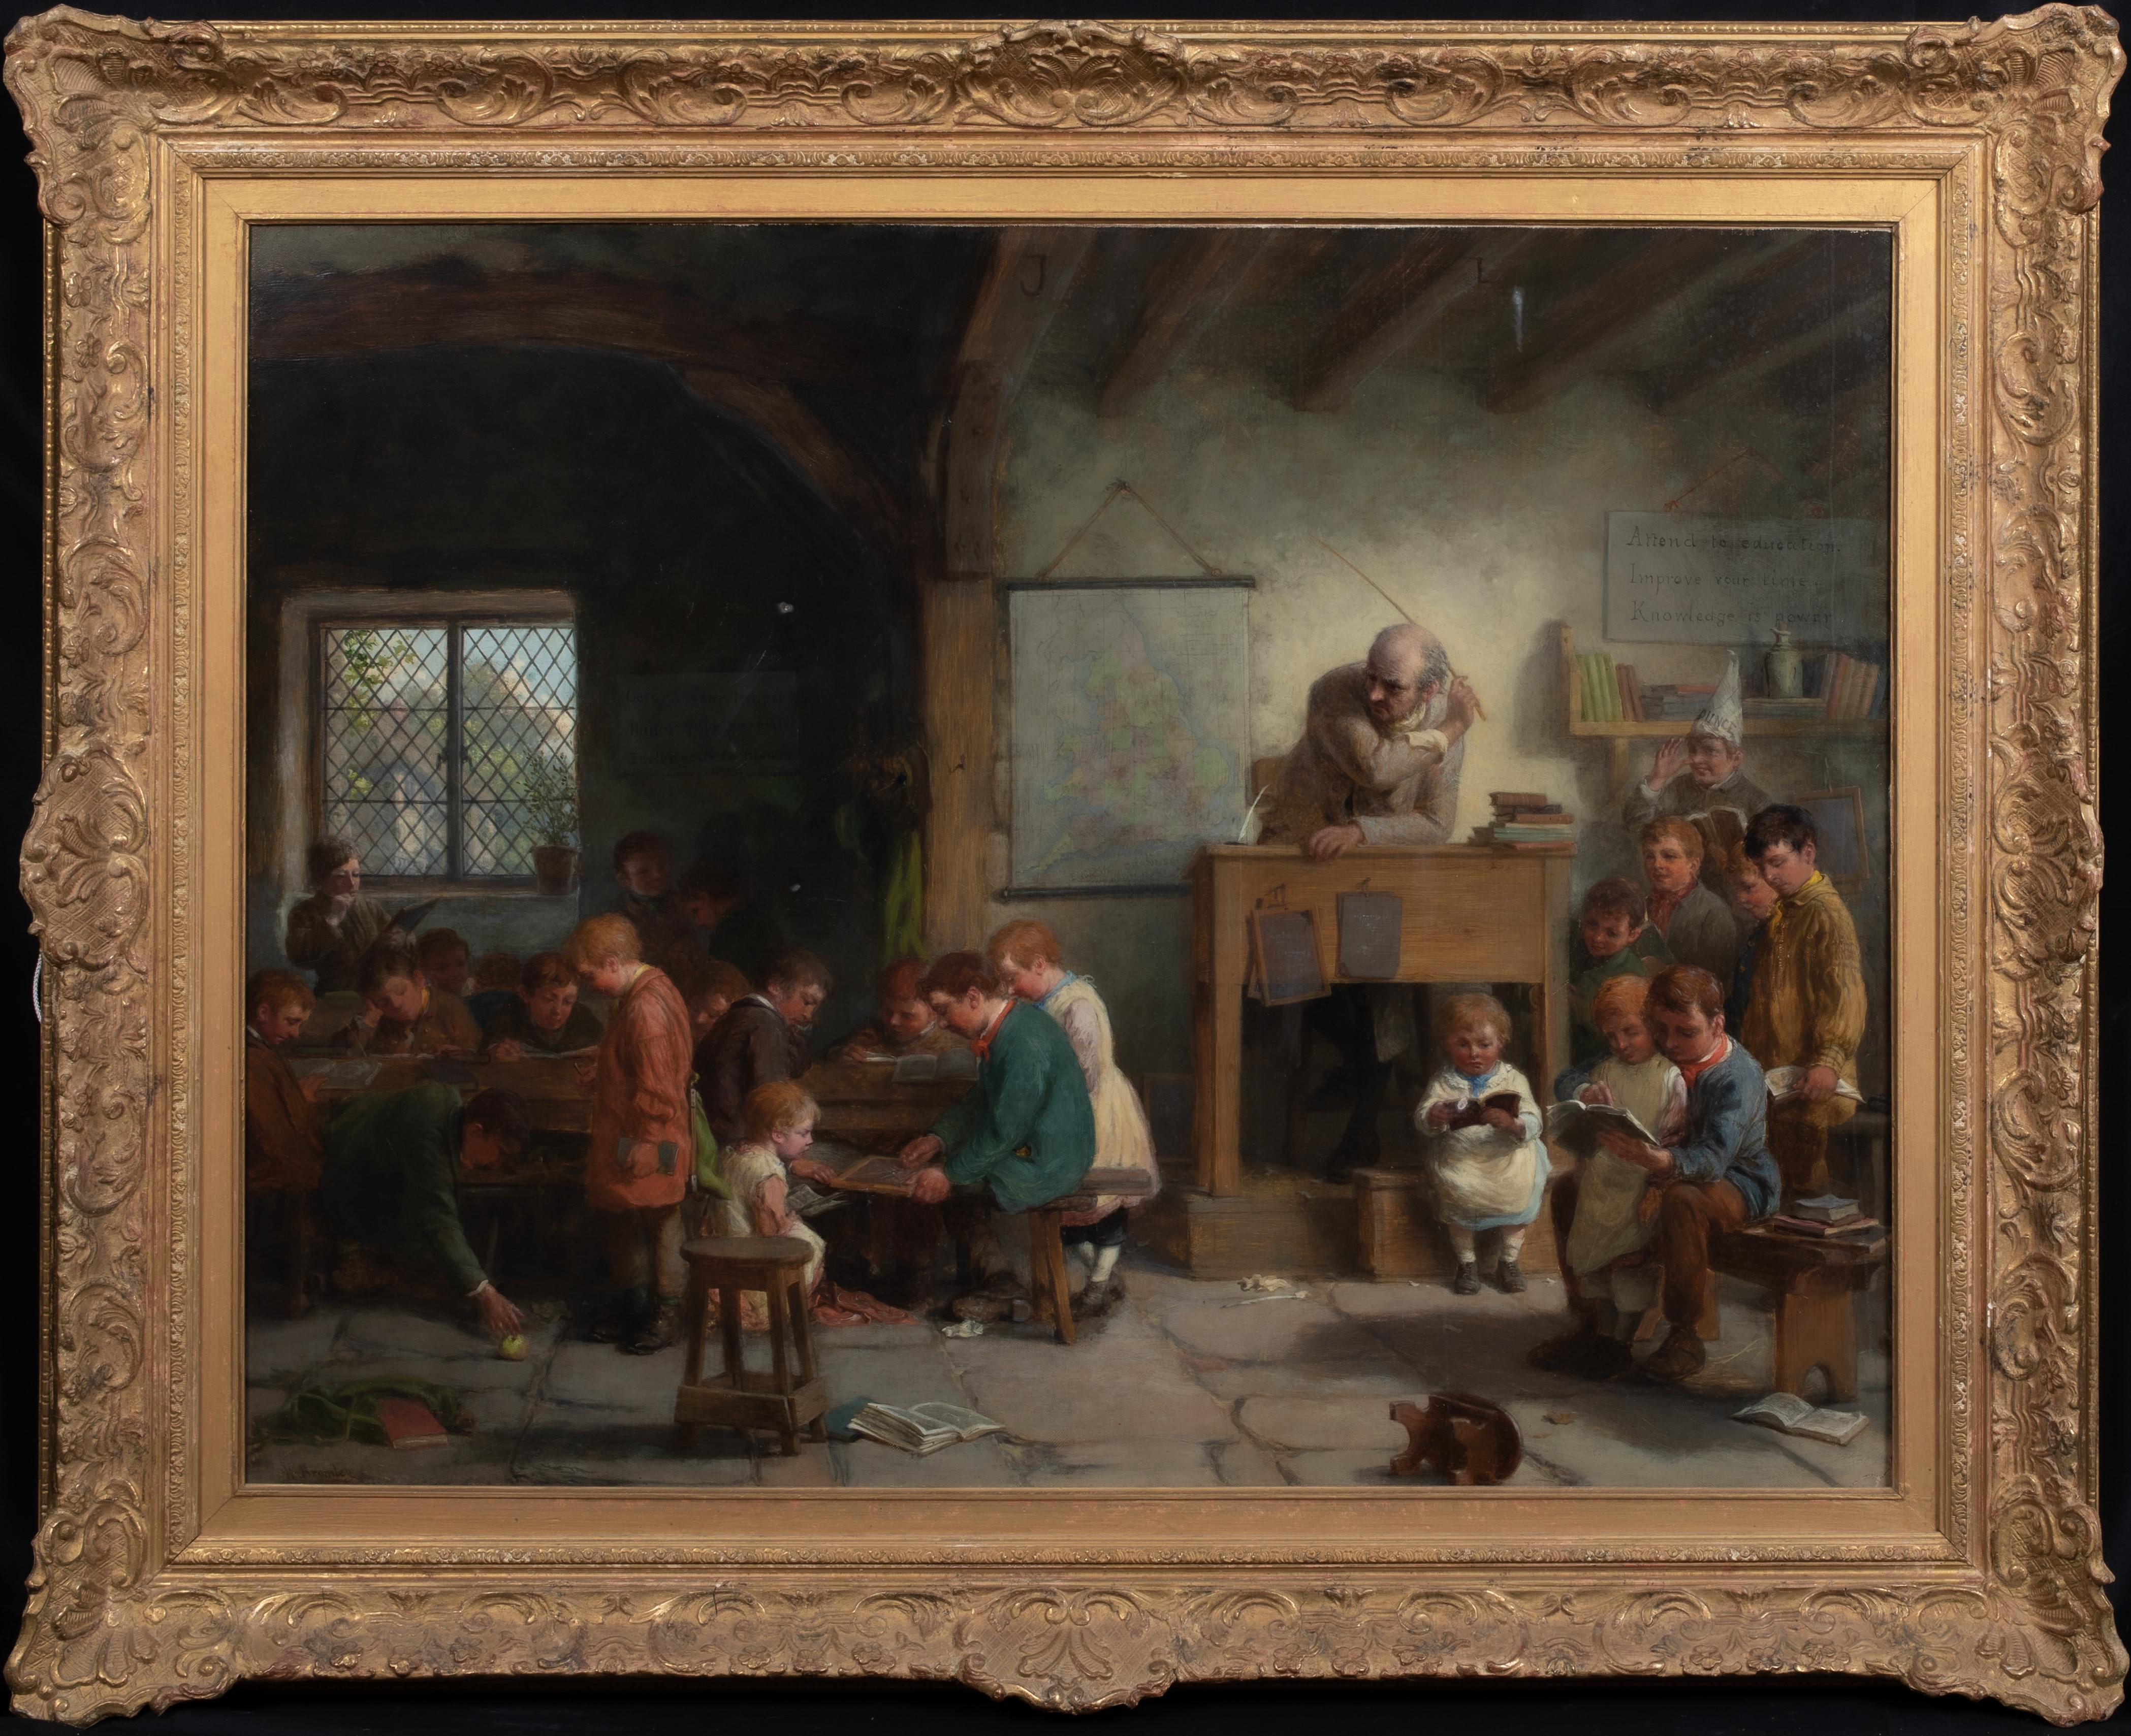 Noughts & Crosses, 19th Century

William Bromley (1816-1890) 

Large 19th Century Victorian Classroom interior of a teacher and his class playing noughts and crosses, oil on canvas by William Bromley. Excellent quality and condition large interior